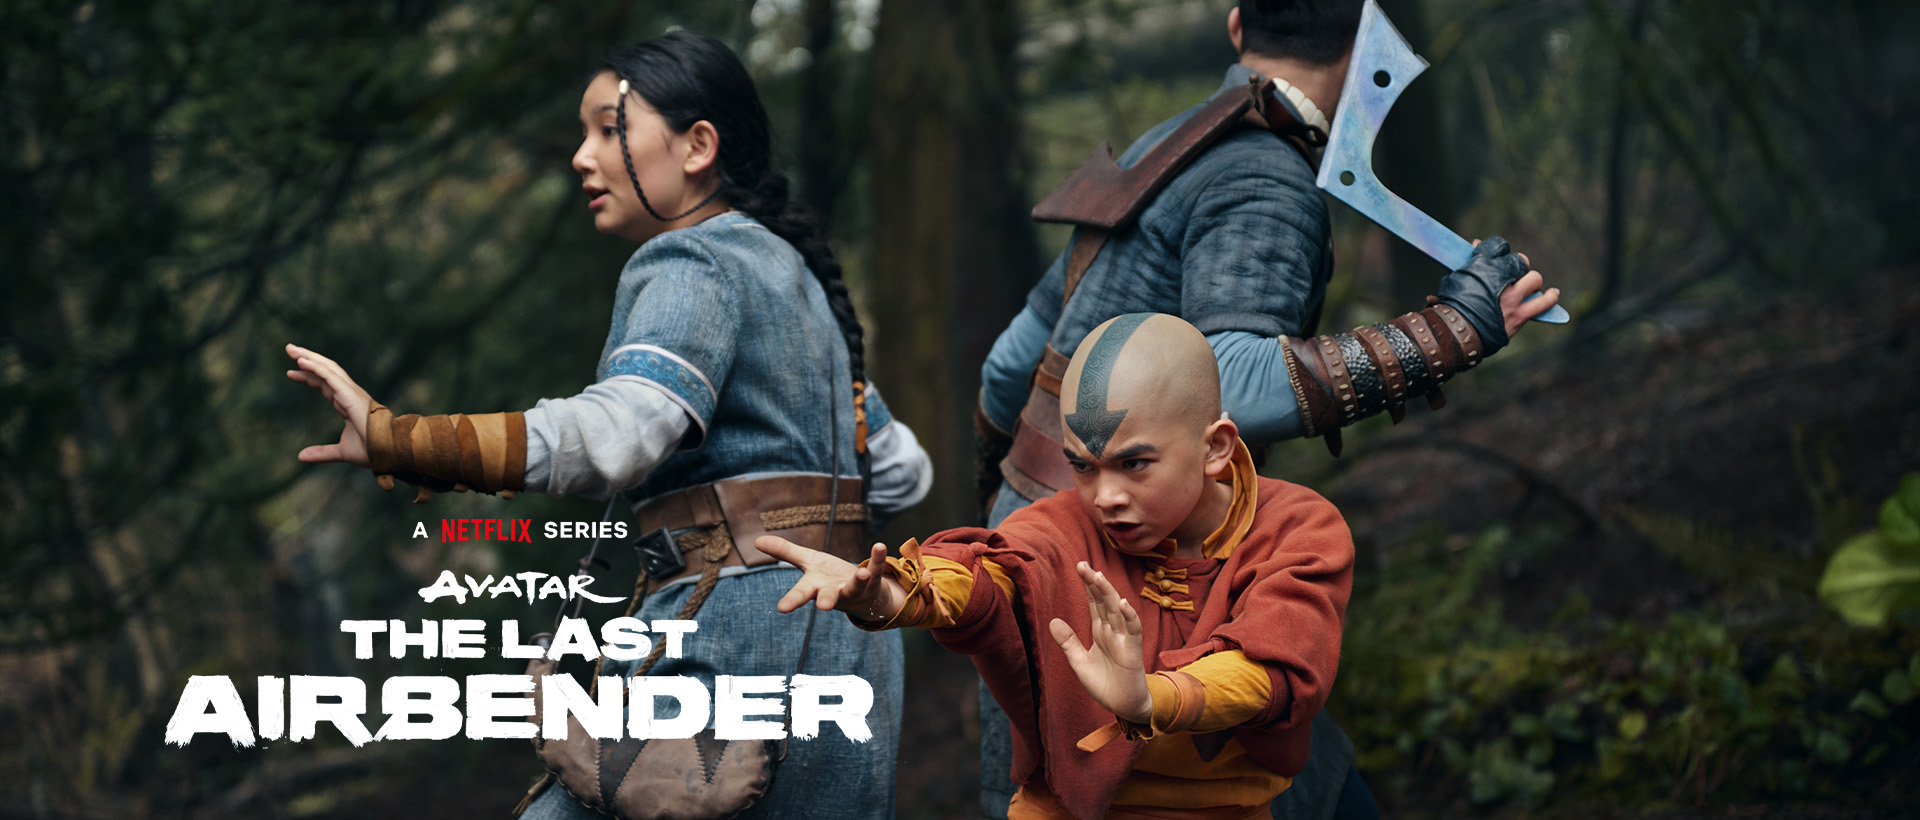 avatar the last airbender netflix review banner